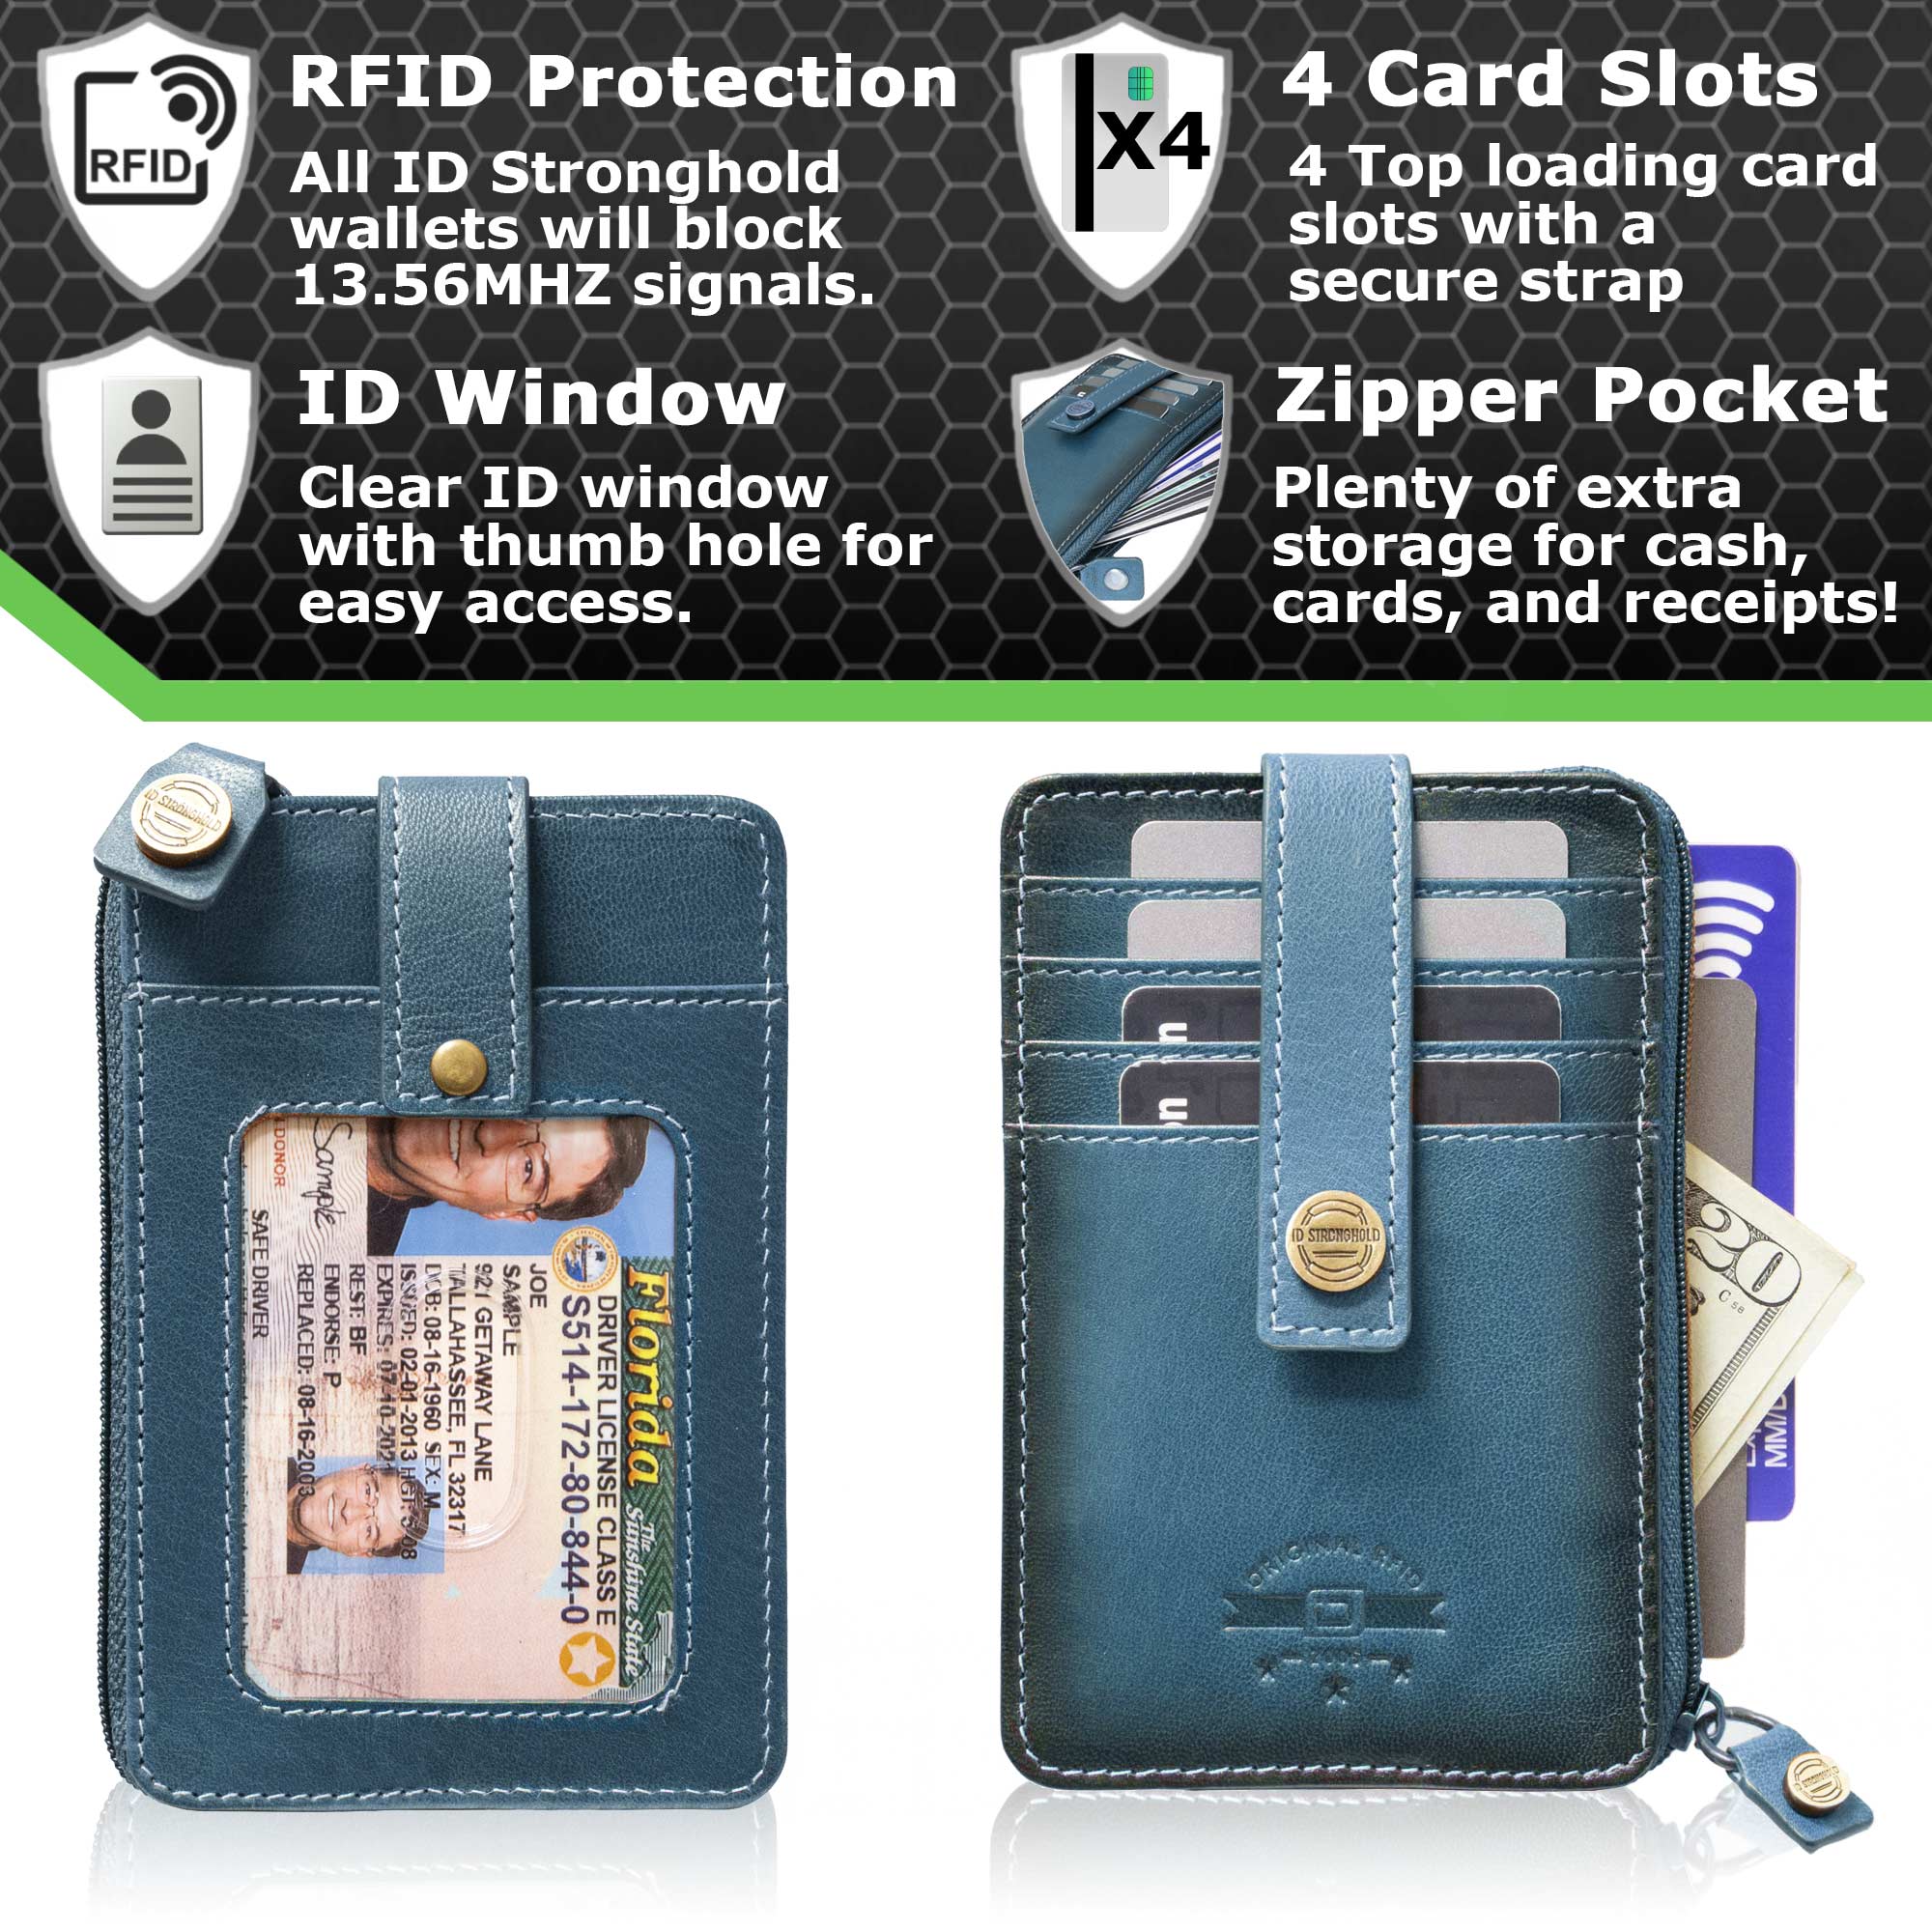 There Are Plenty Of RFID-Blocking Products, But Do You Need Them